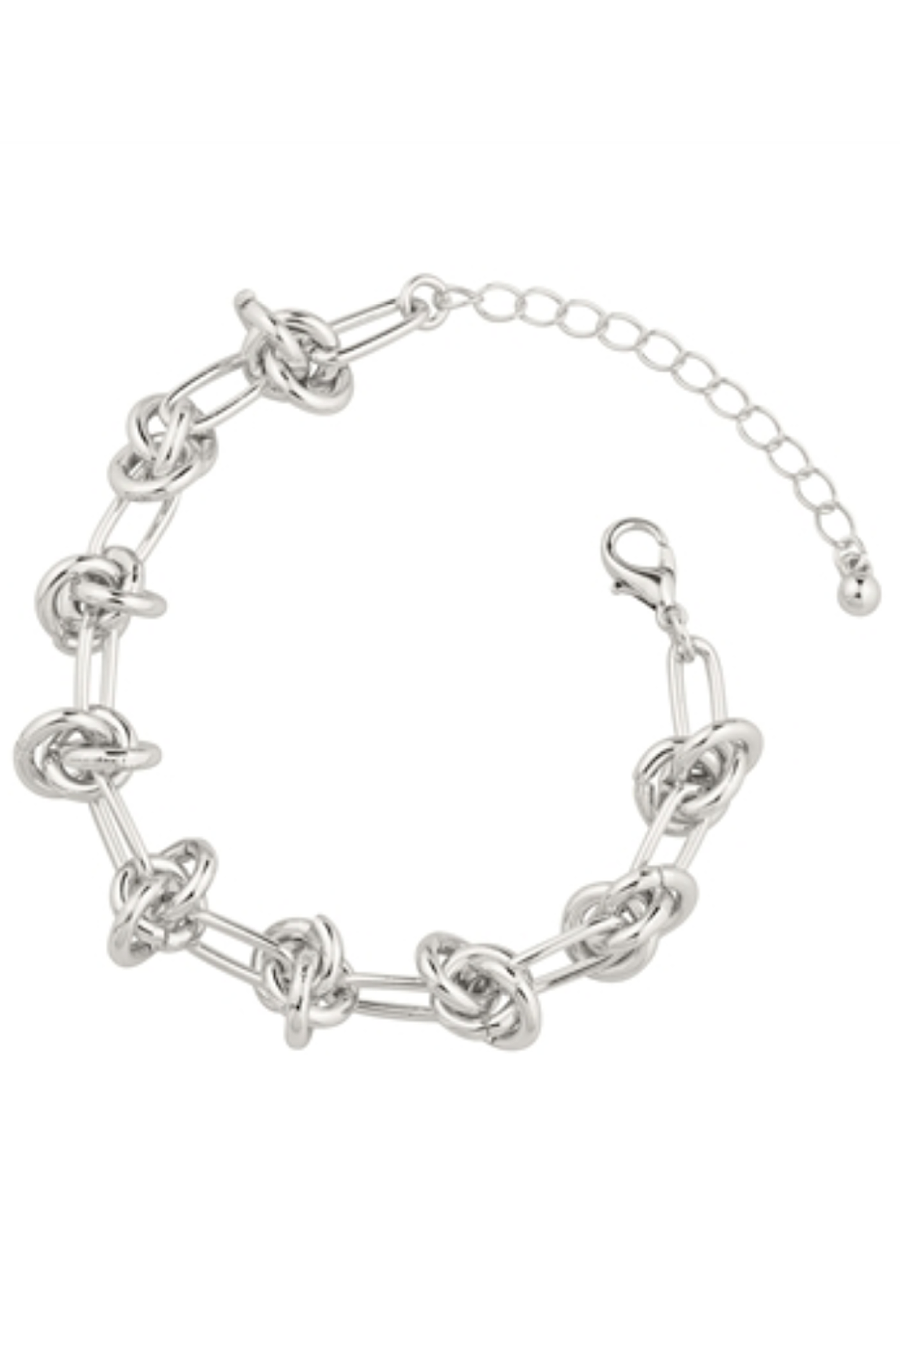 Silver Knotted Chain Bracelet